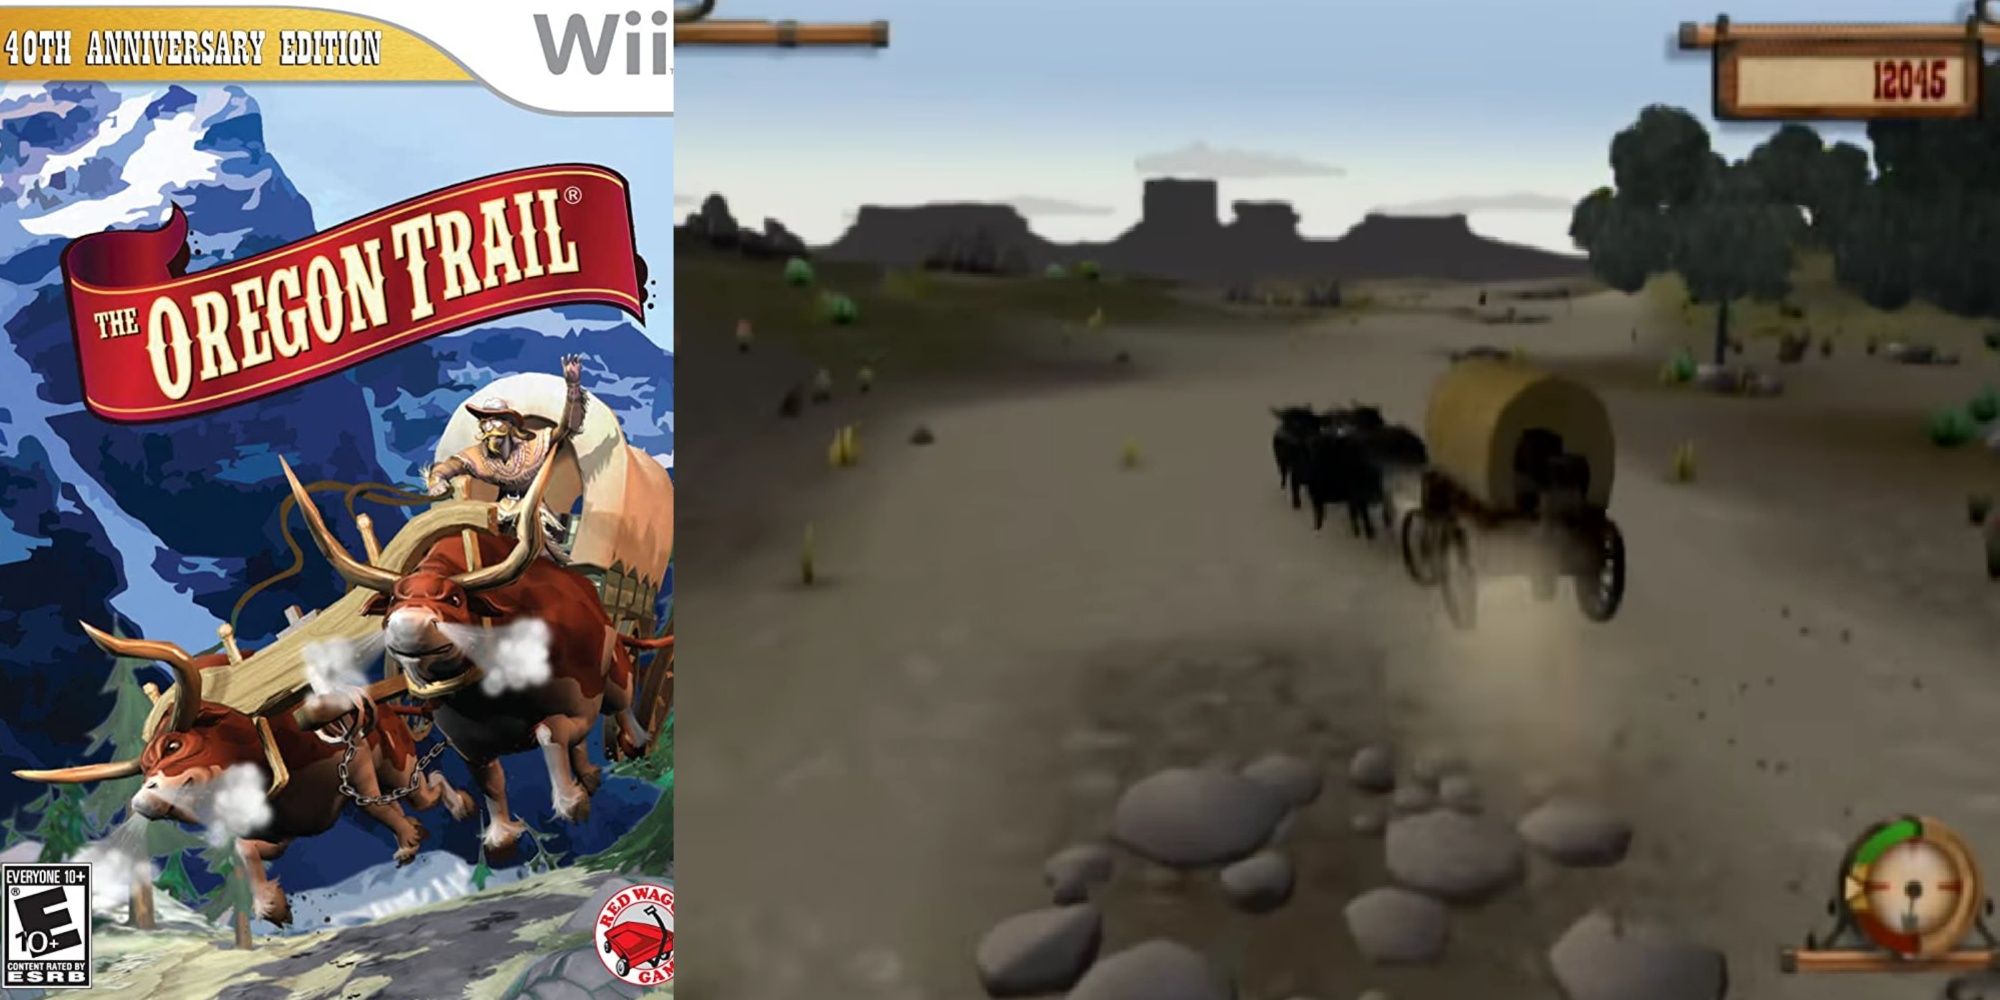 A split-image of the Wii artwork for The Oregon Trail 40th Anniversary Edition and a wagon cart being pulled by cattle on a rocky deserted road.